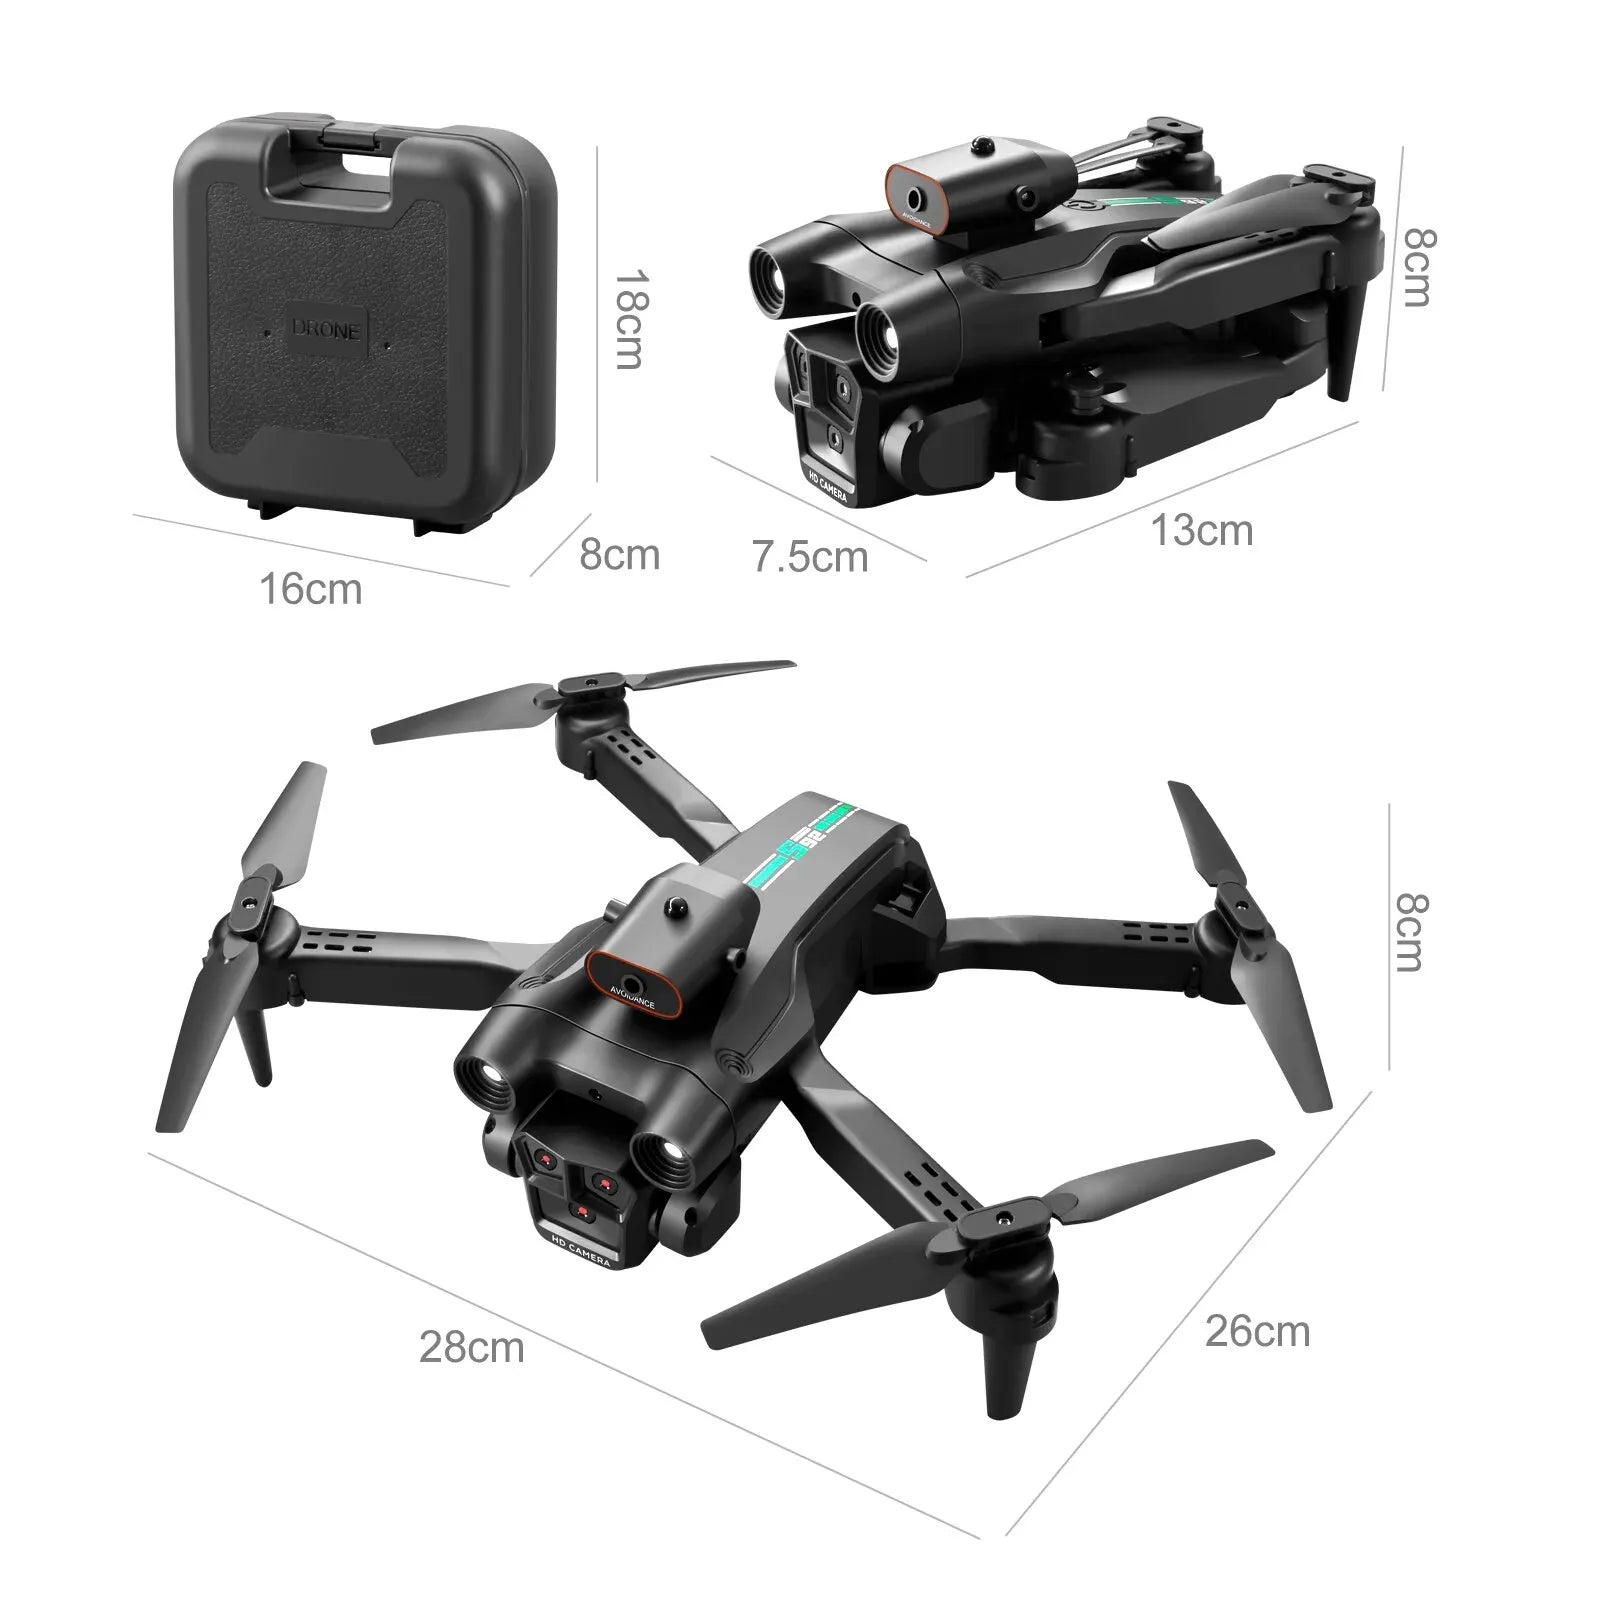 S92 Drone, with WiFi, you can easily control the drone from your smartphone or tablet .